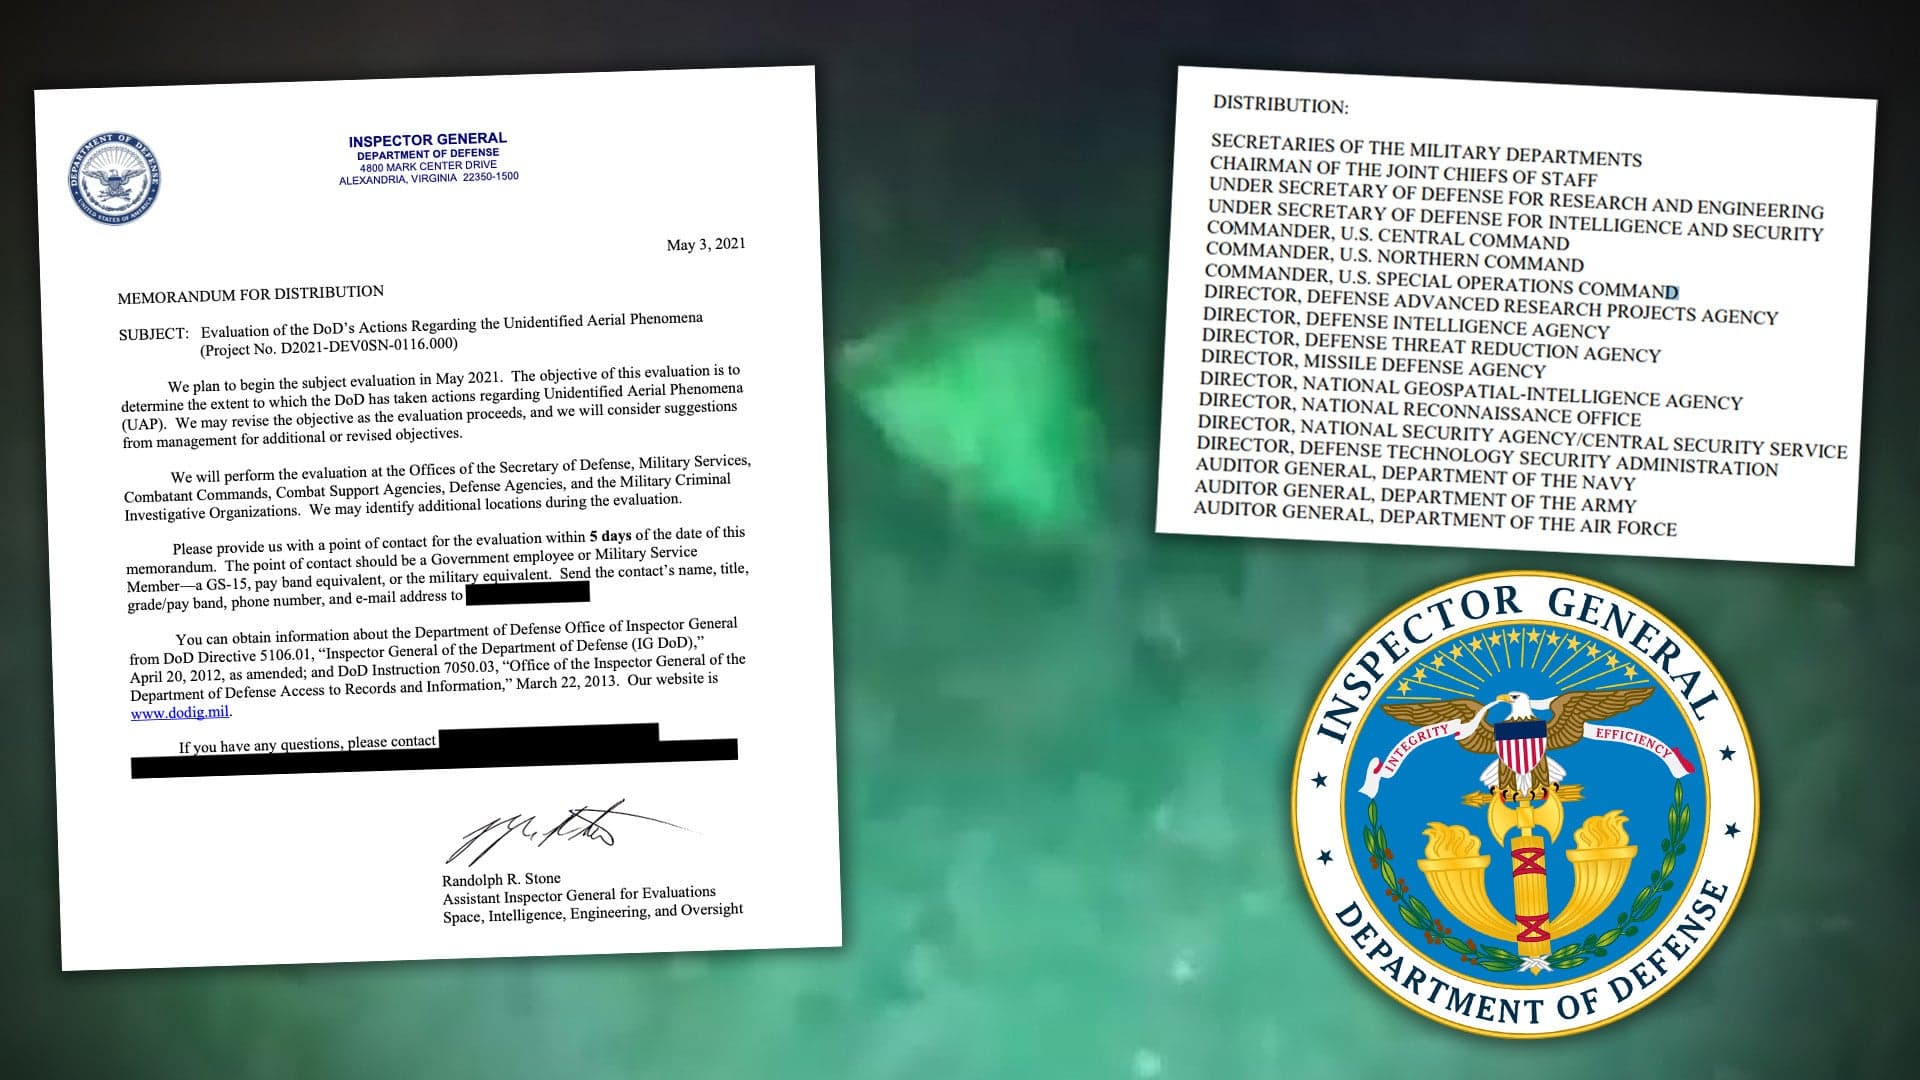 Probe Into Handling Of UFO Encounters Launched By Pentagon’s Inspector General